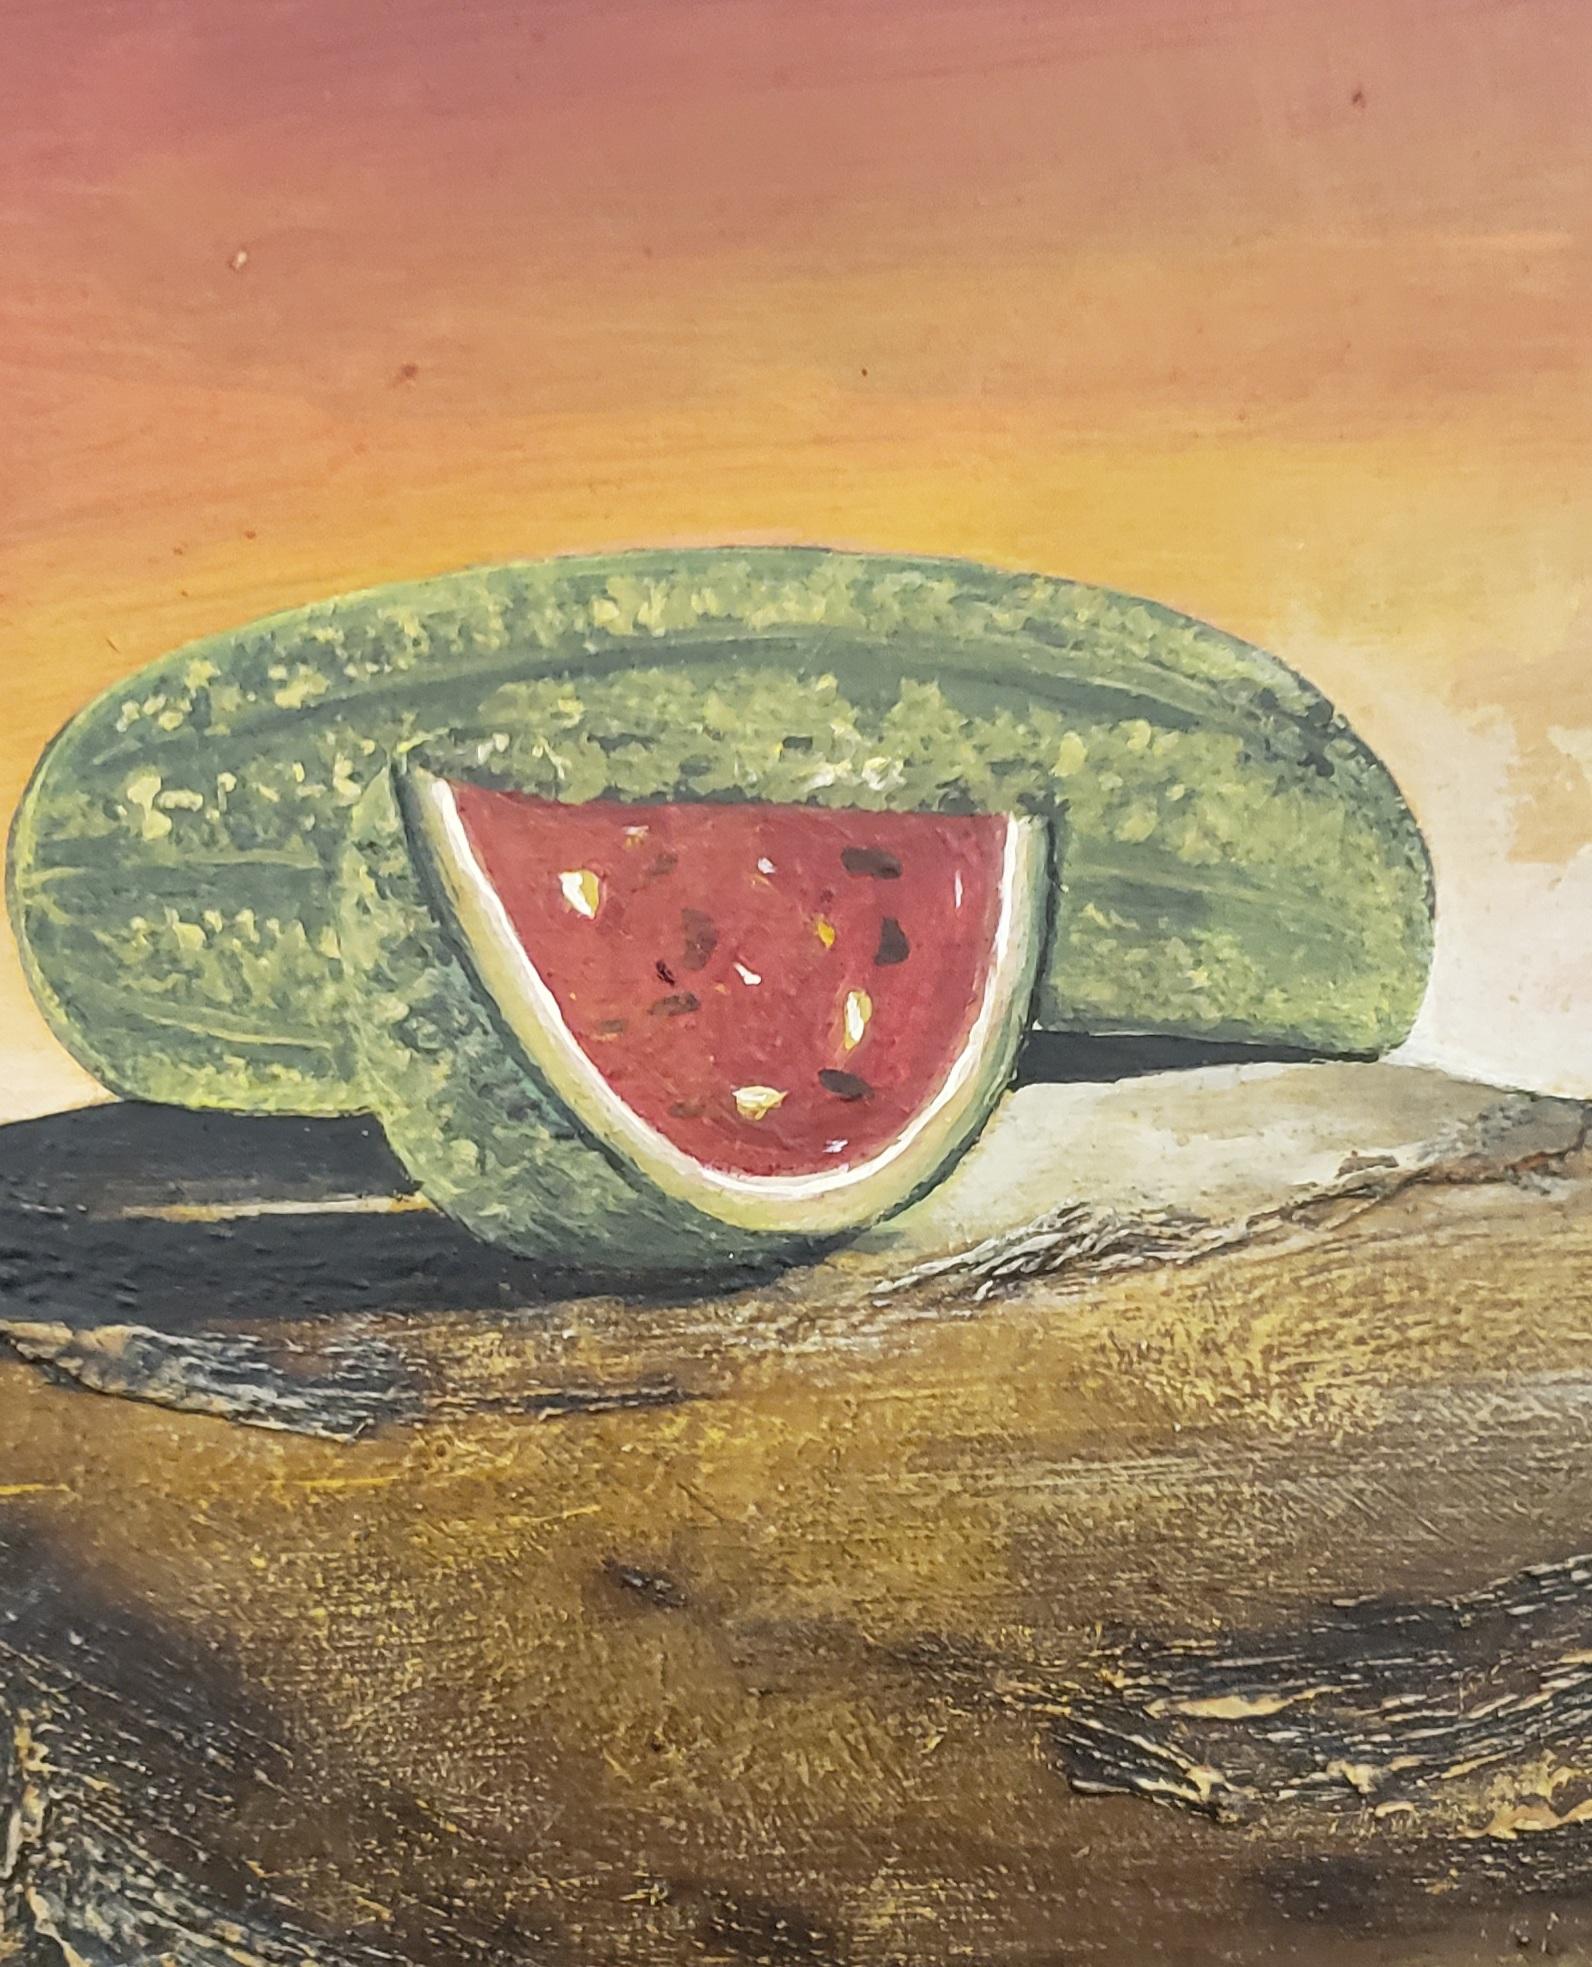 Sandia (Watermelon) Surreal  Emerging Artist  National Academy of Art of Uruguay - Realist Painting by Carlos Duarte